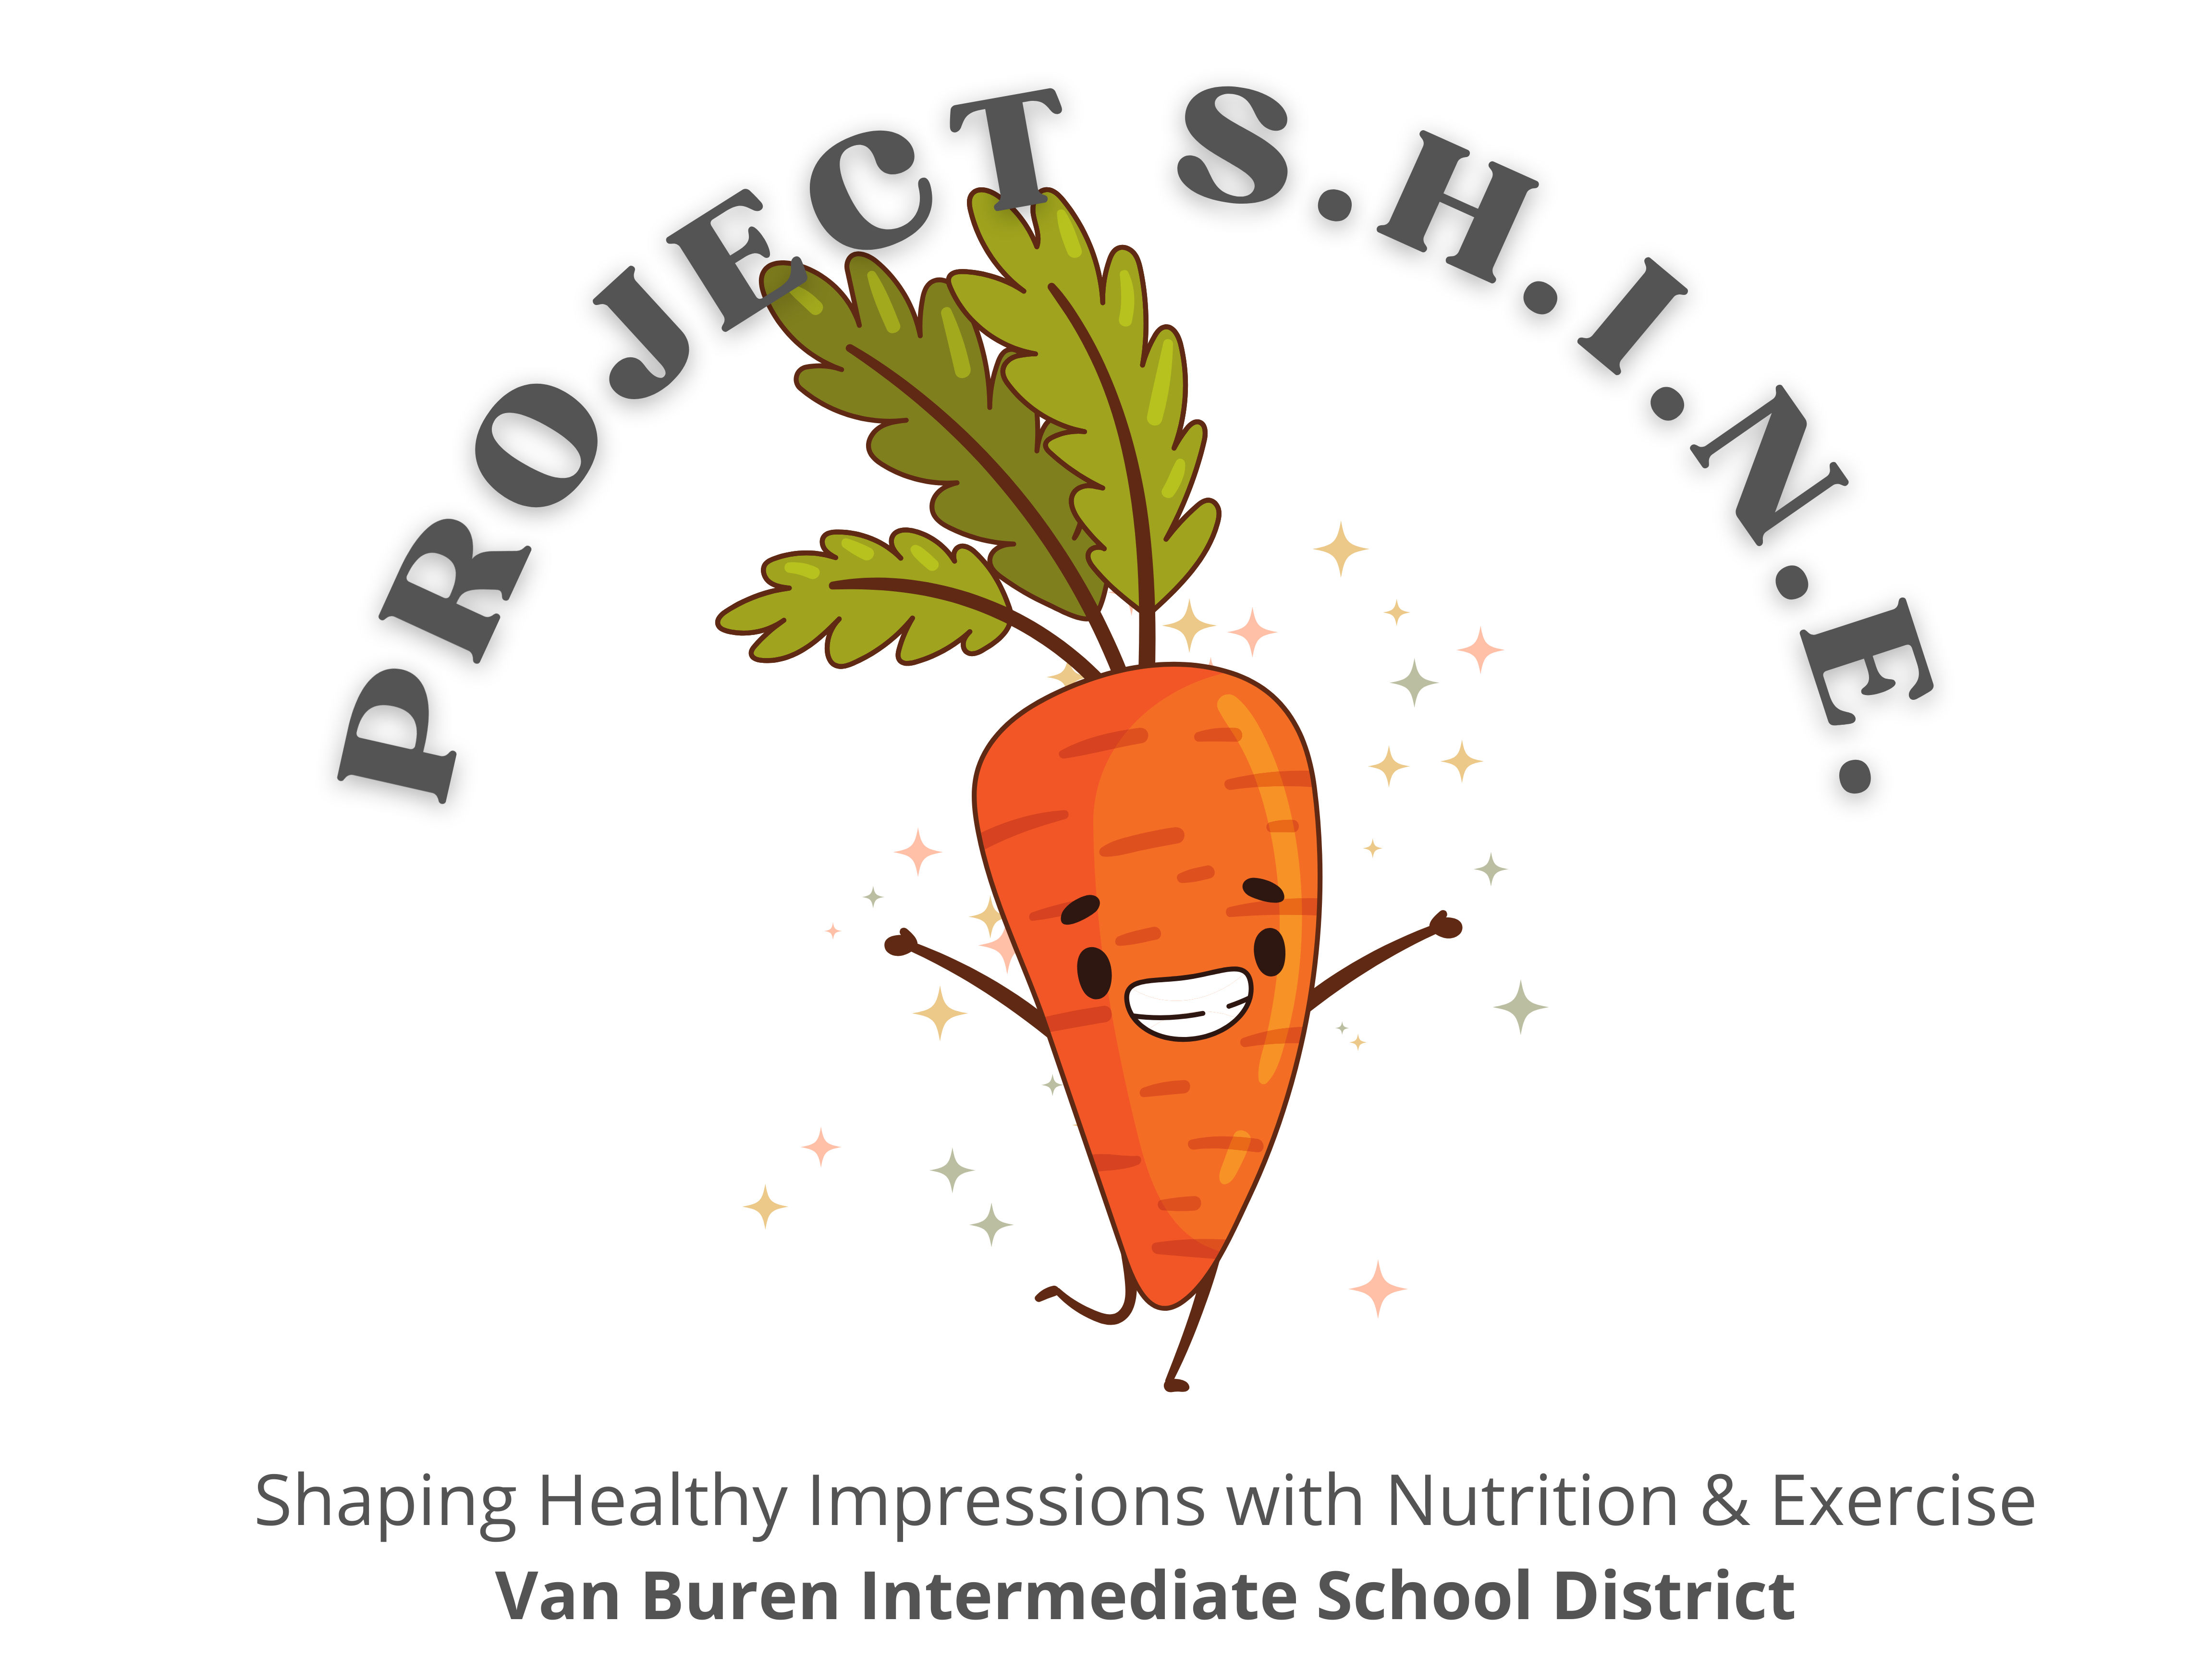 Project SHINE Logo.The words "Project S.H.I.N.E.  over an image of a cartoon carrot.  At the bottom has text "Shaping Healthy Impressions with Nutrition and Exercise followed by Van Buren Intermediate School District